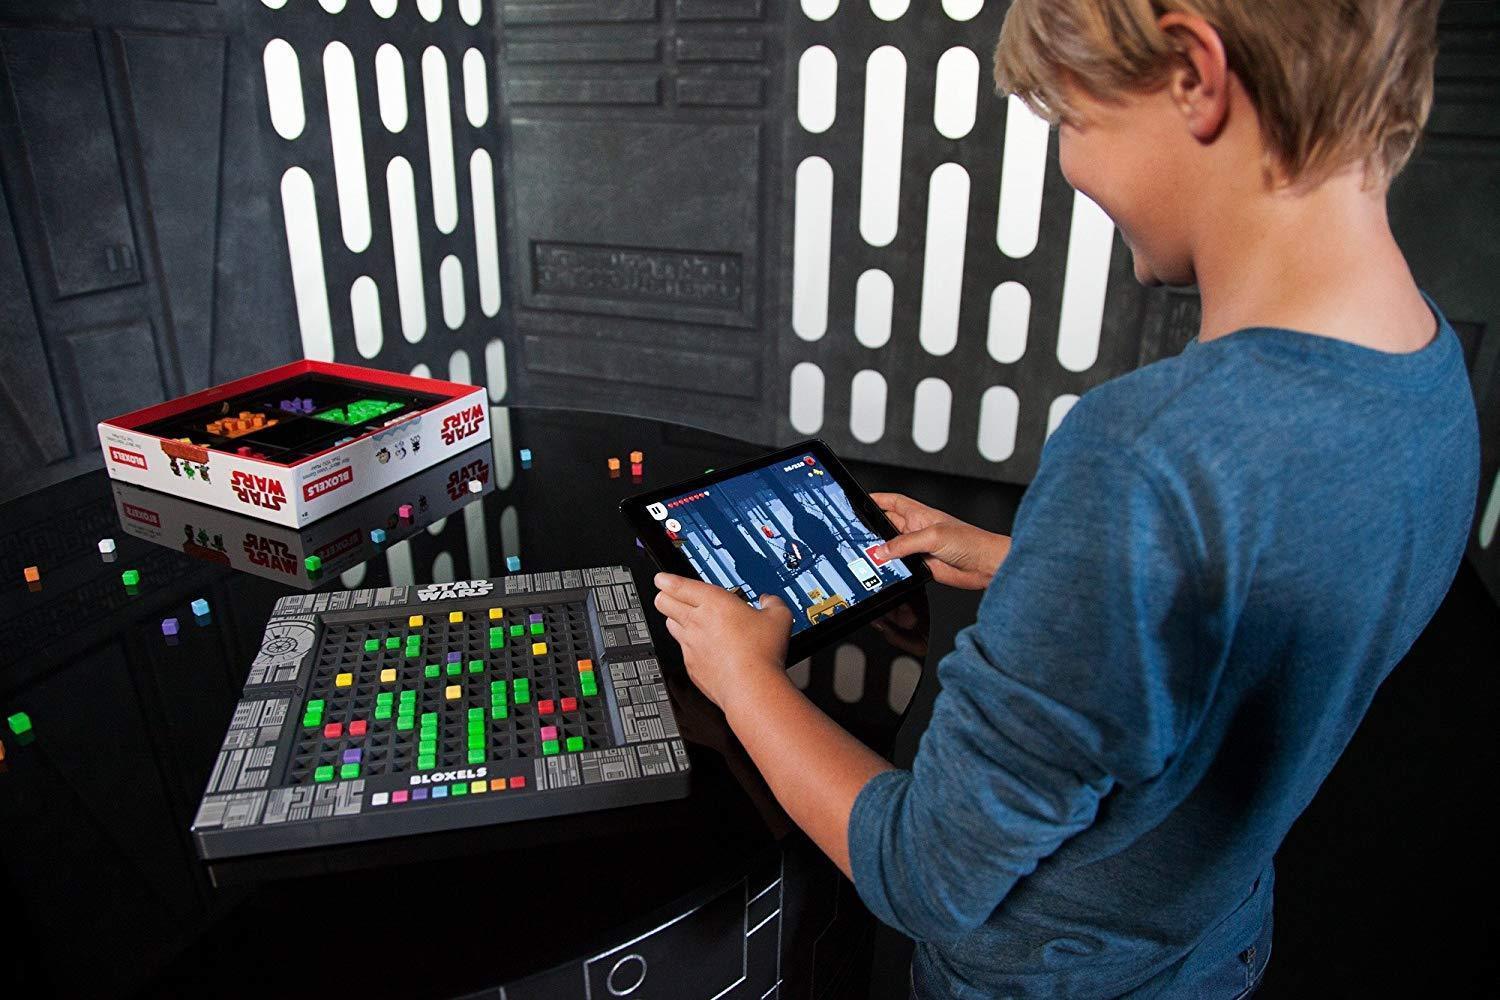 Item image 3. Star Wars Bloxels Build Your Own Video Game Innovative Creati...